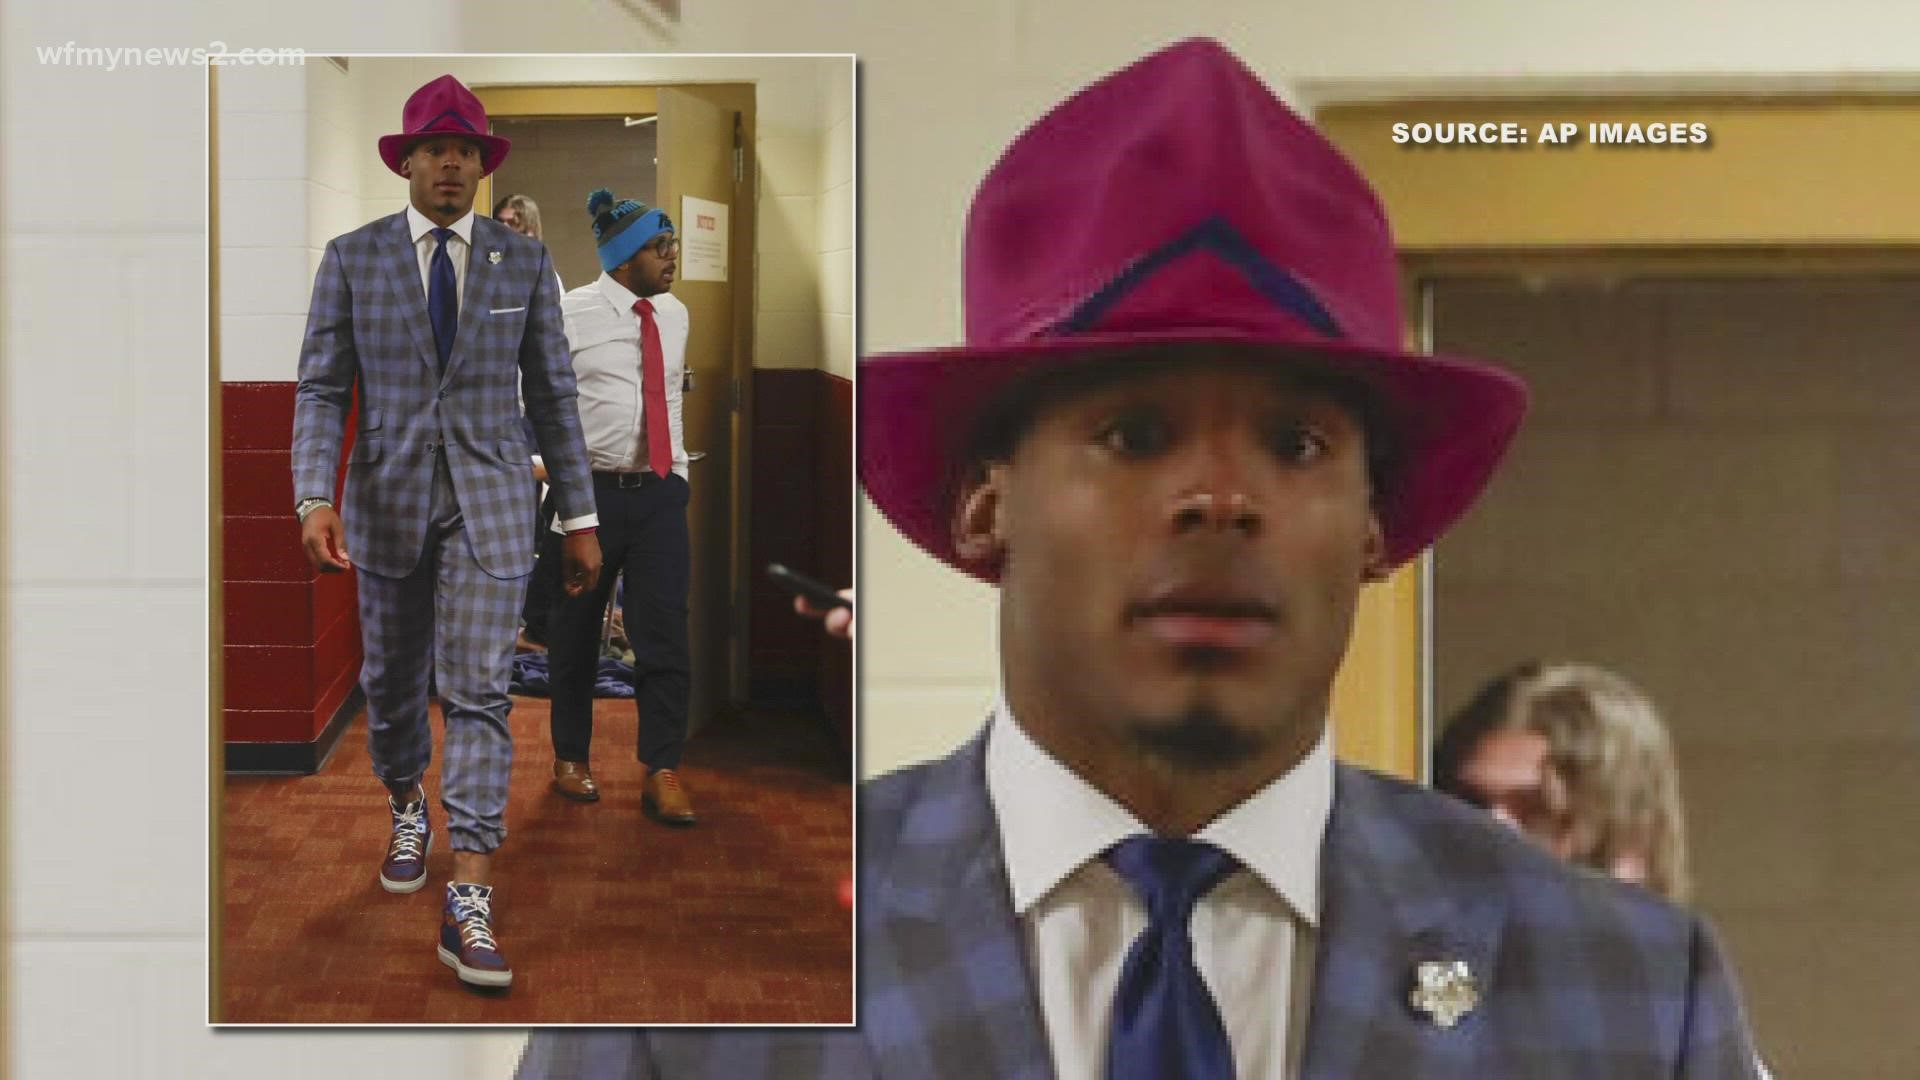 Cam Newton is known for some crazy outfits. We look back at some of his top looks.